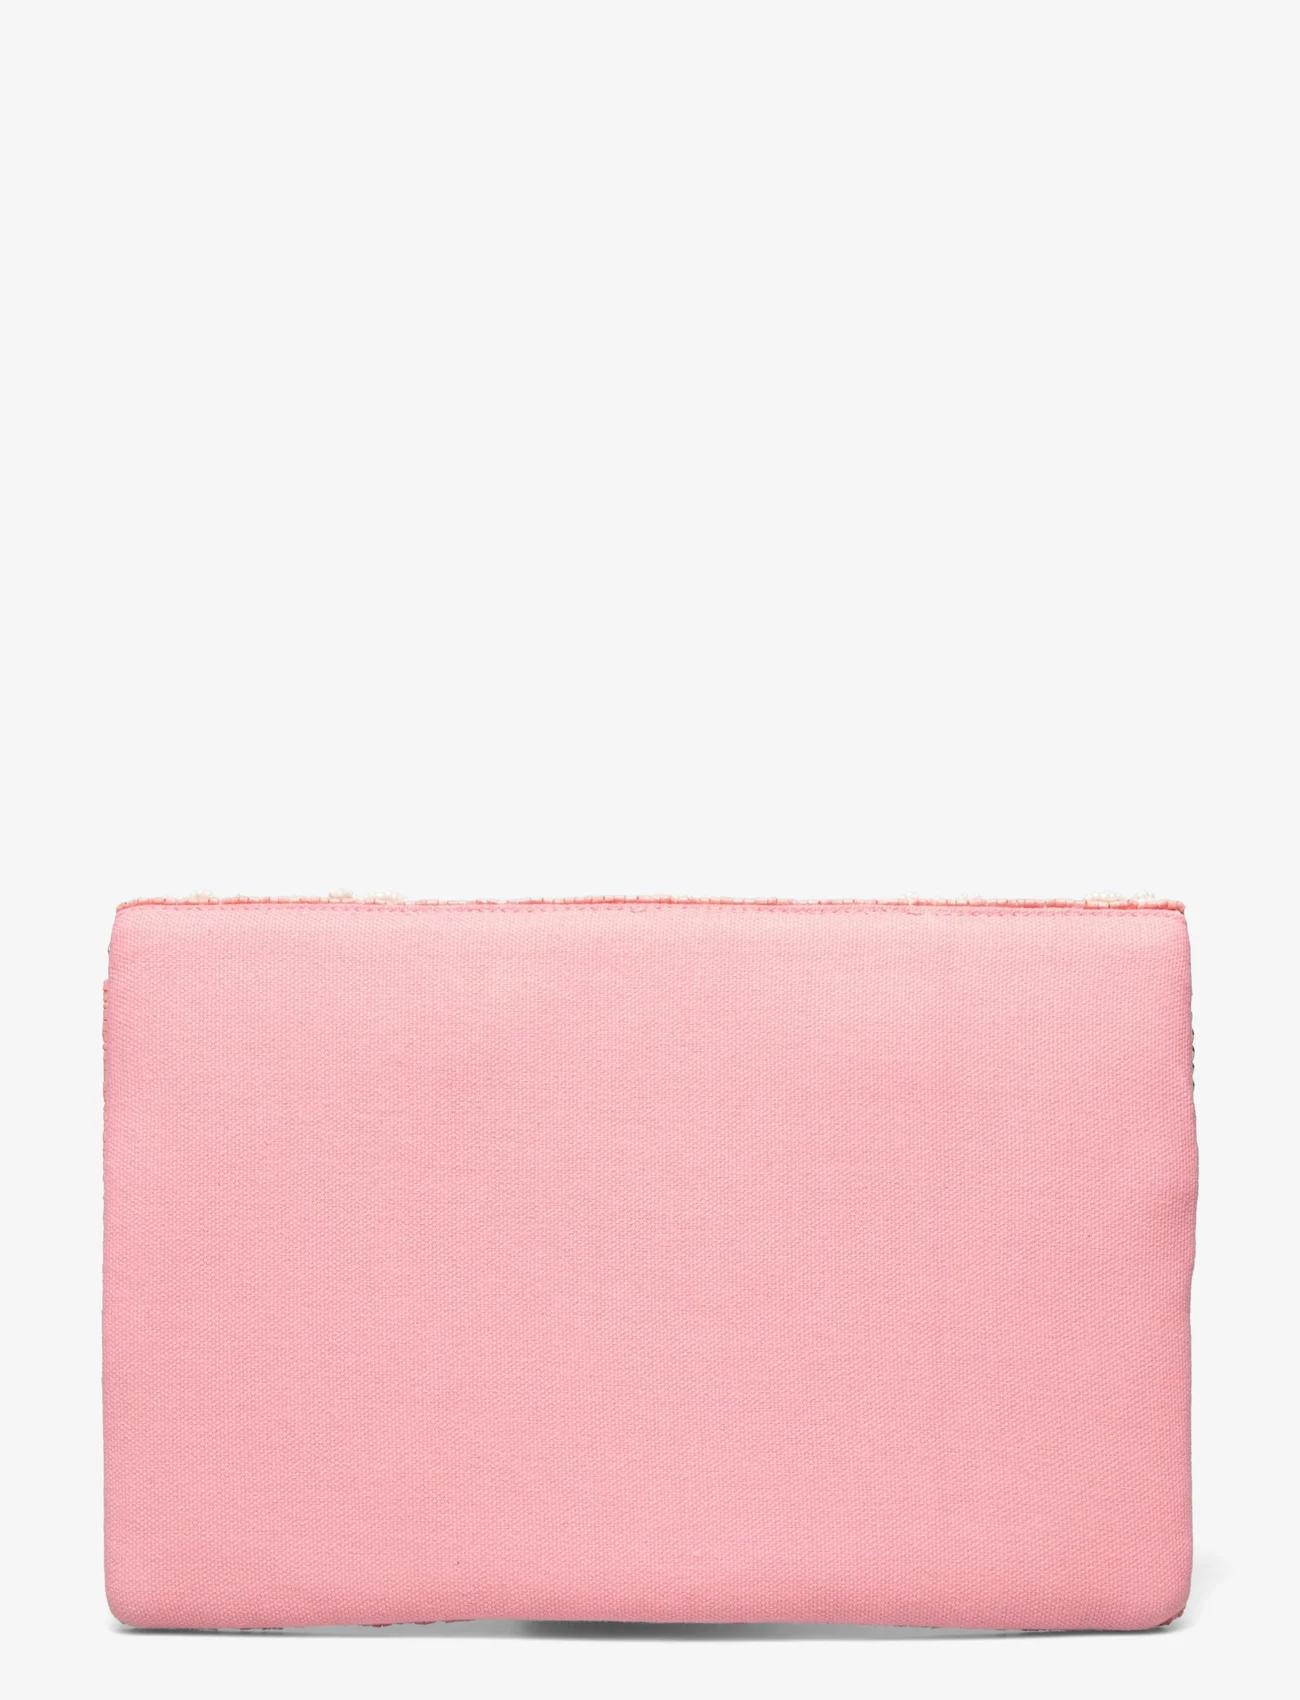 Pipol's Bazaar - Le Jardin Clutch Pink - party wear at outlet prices - pink - 1